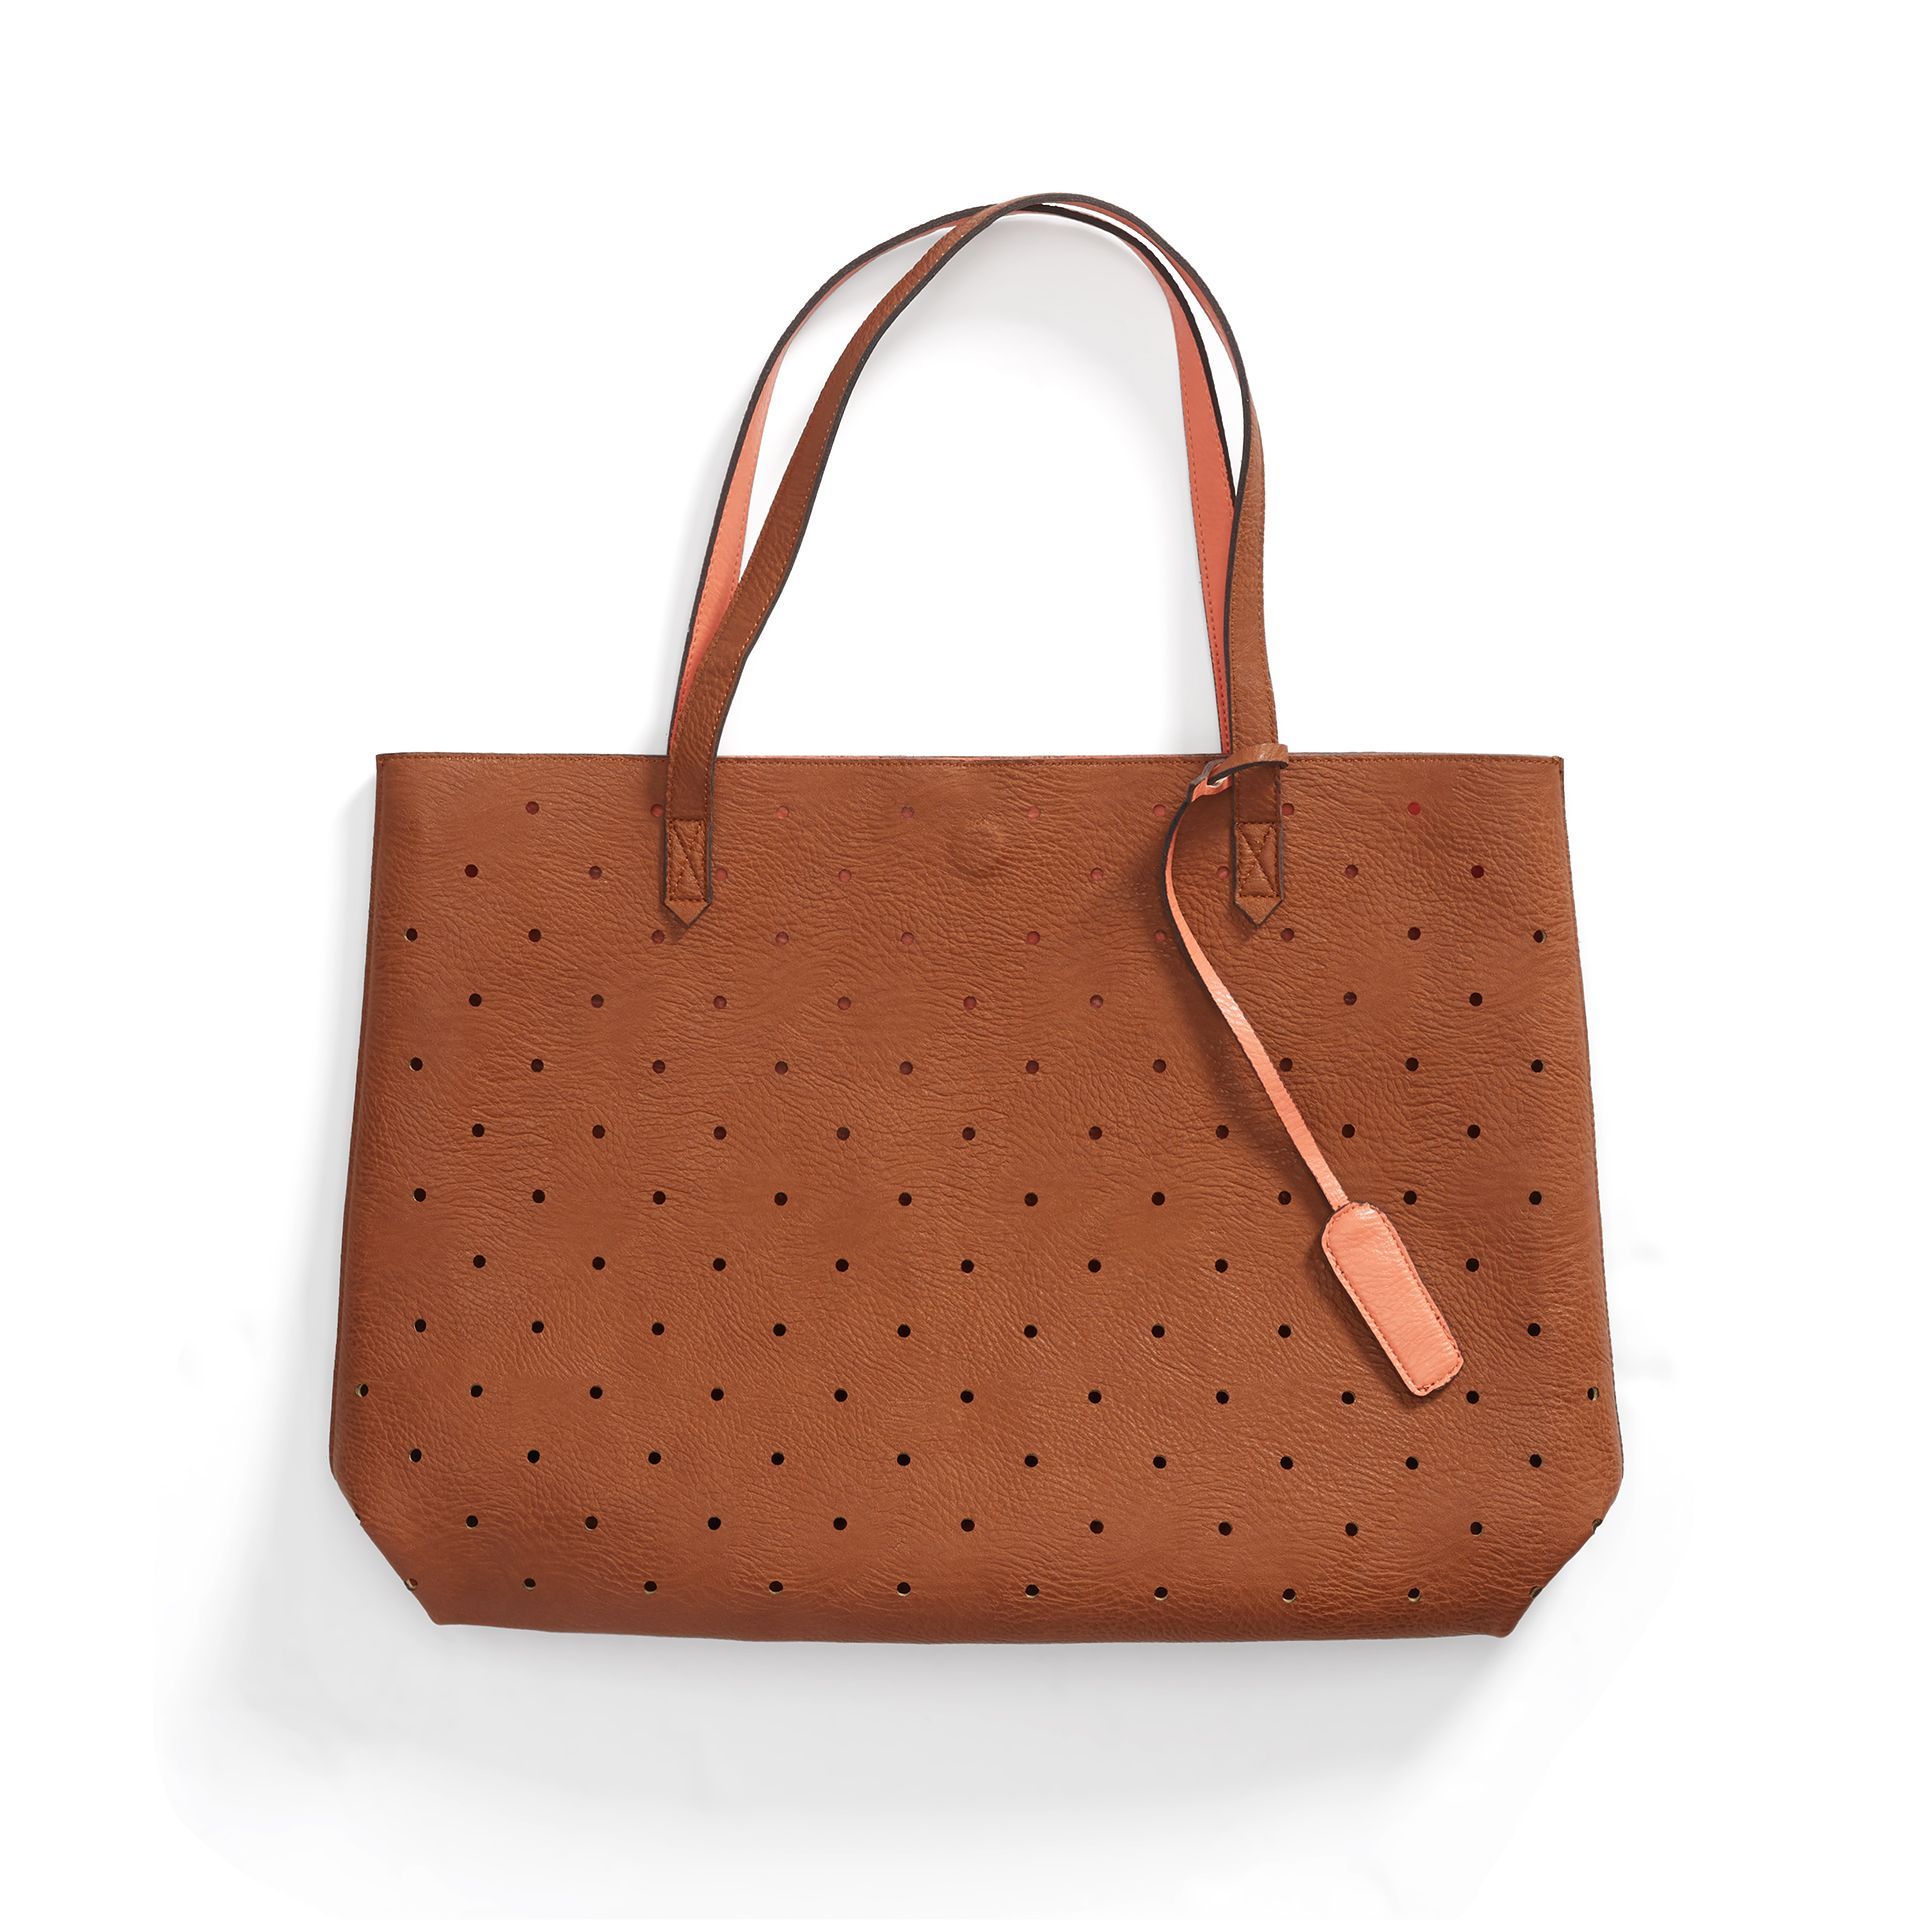 Stitch Fix Spring Bags: Clutches, Totes, Saddlebags, Satchels and more!